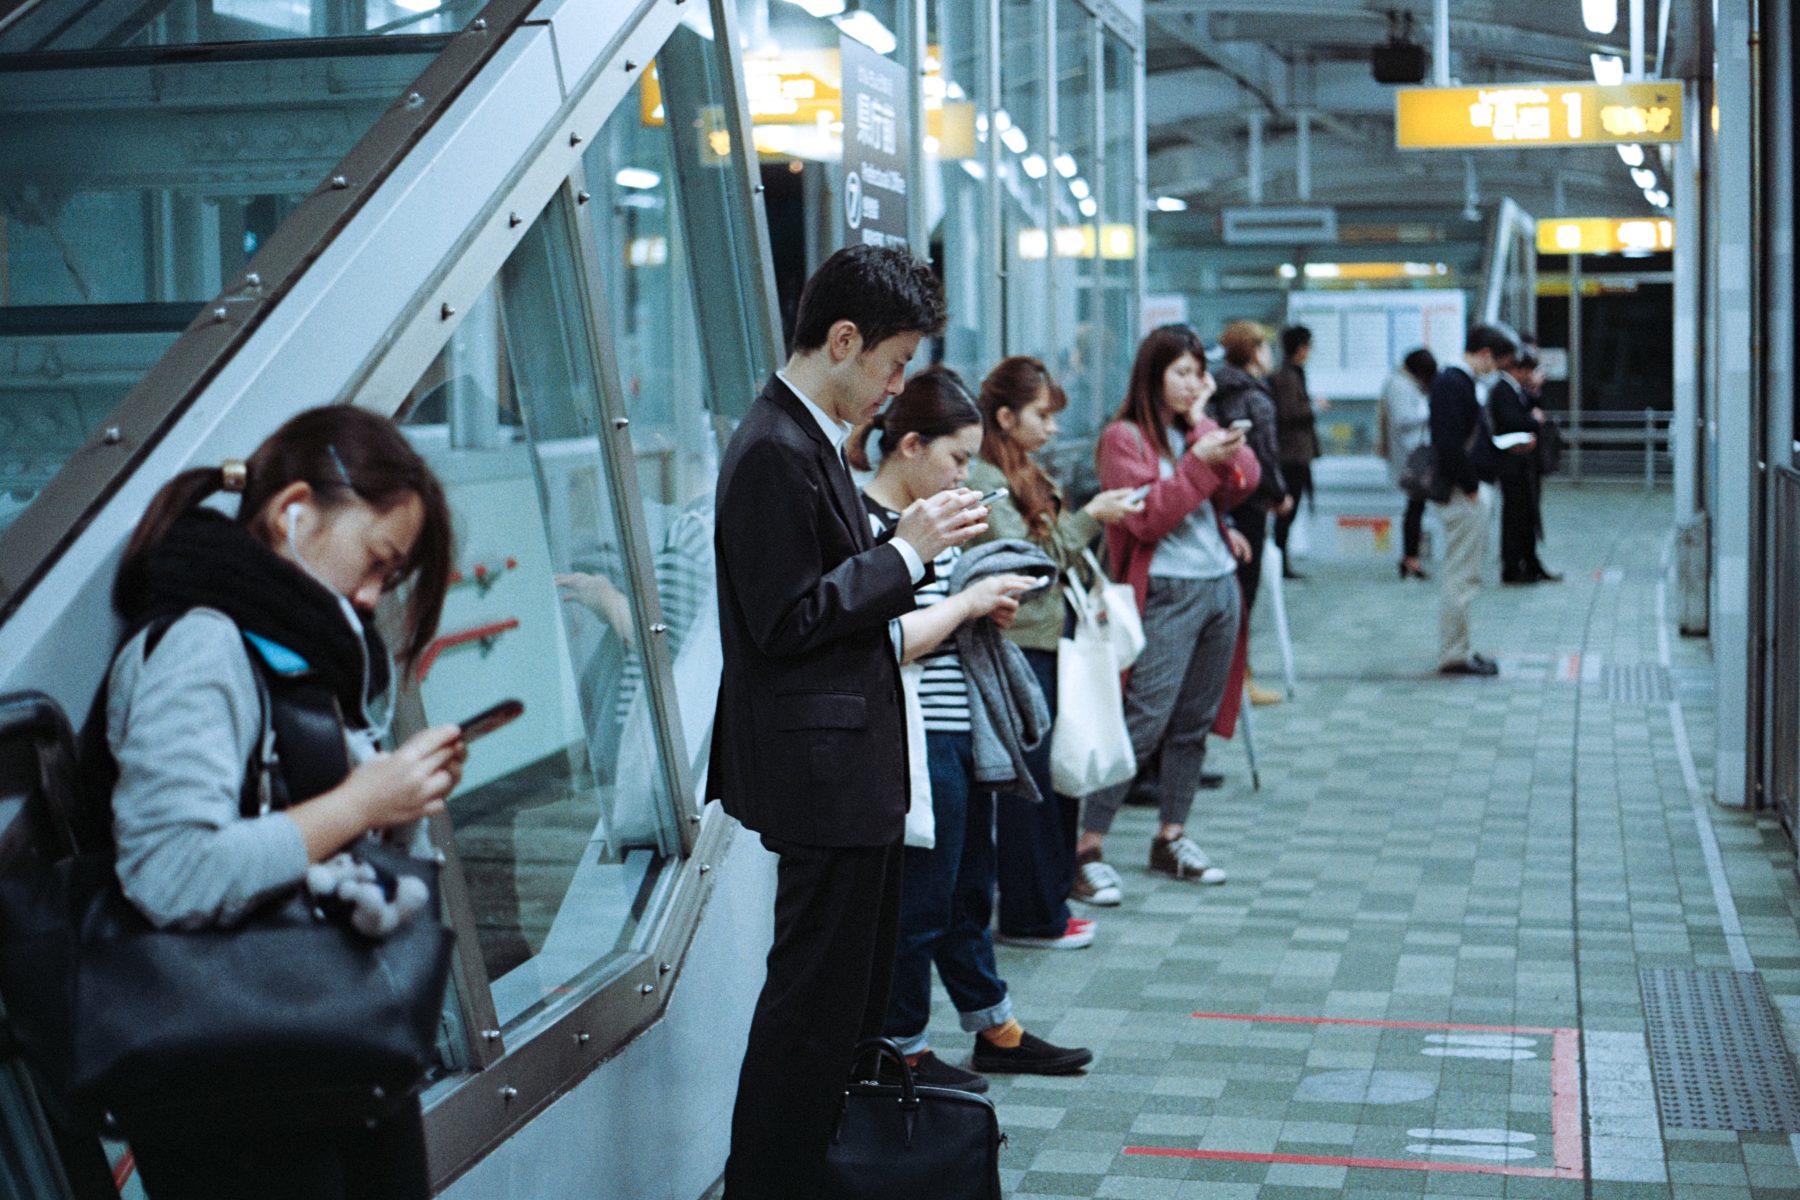 A group of people waiting for a train in Japan, all on their phones.